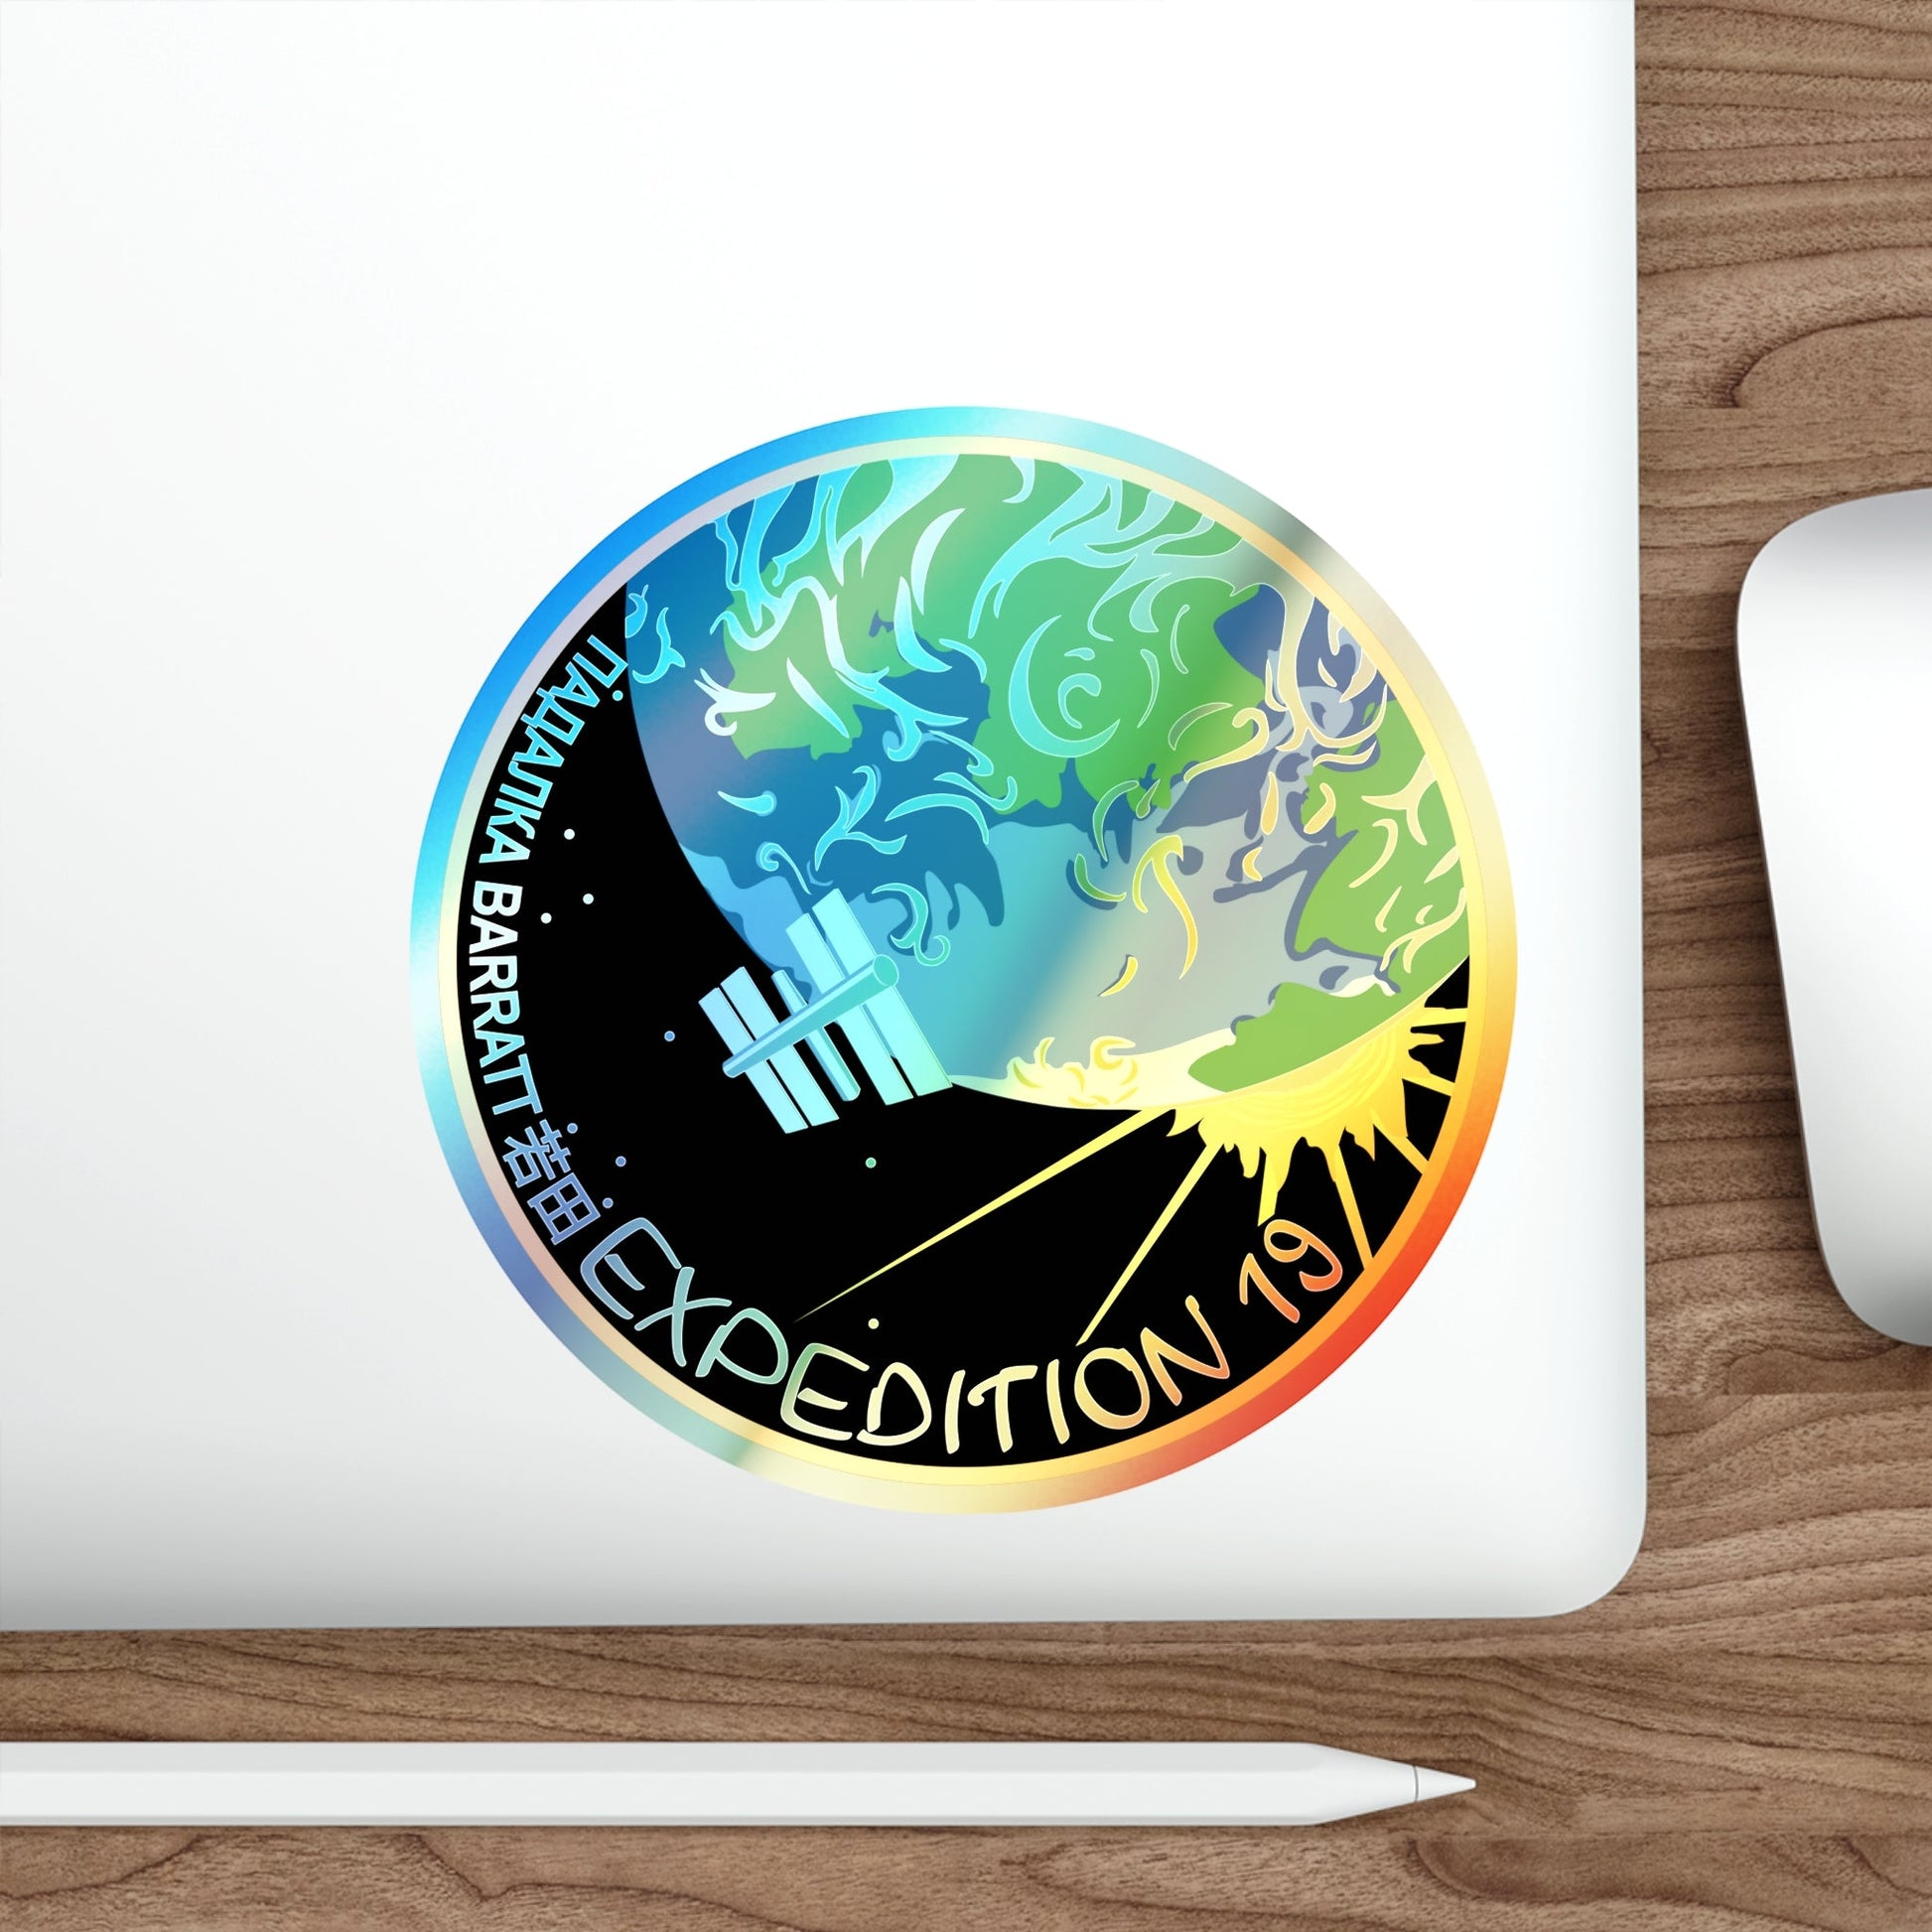 ISS Expedition 19 (NASA) Holographic STICKER Die-Cut Vinyl Decal-The Sticker Space